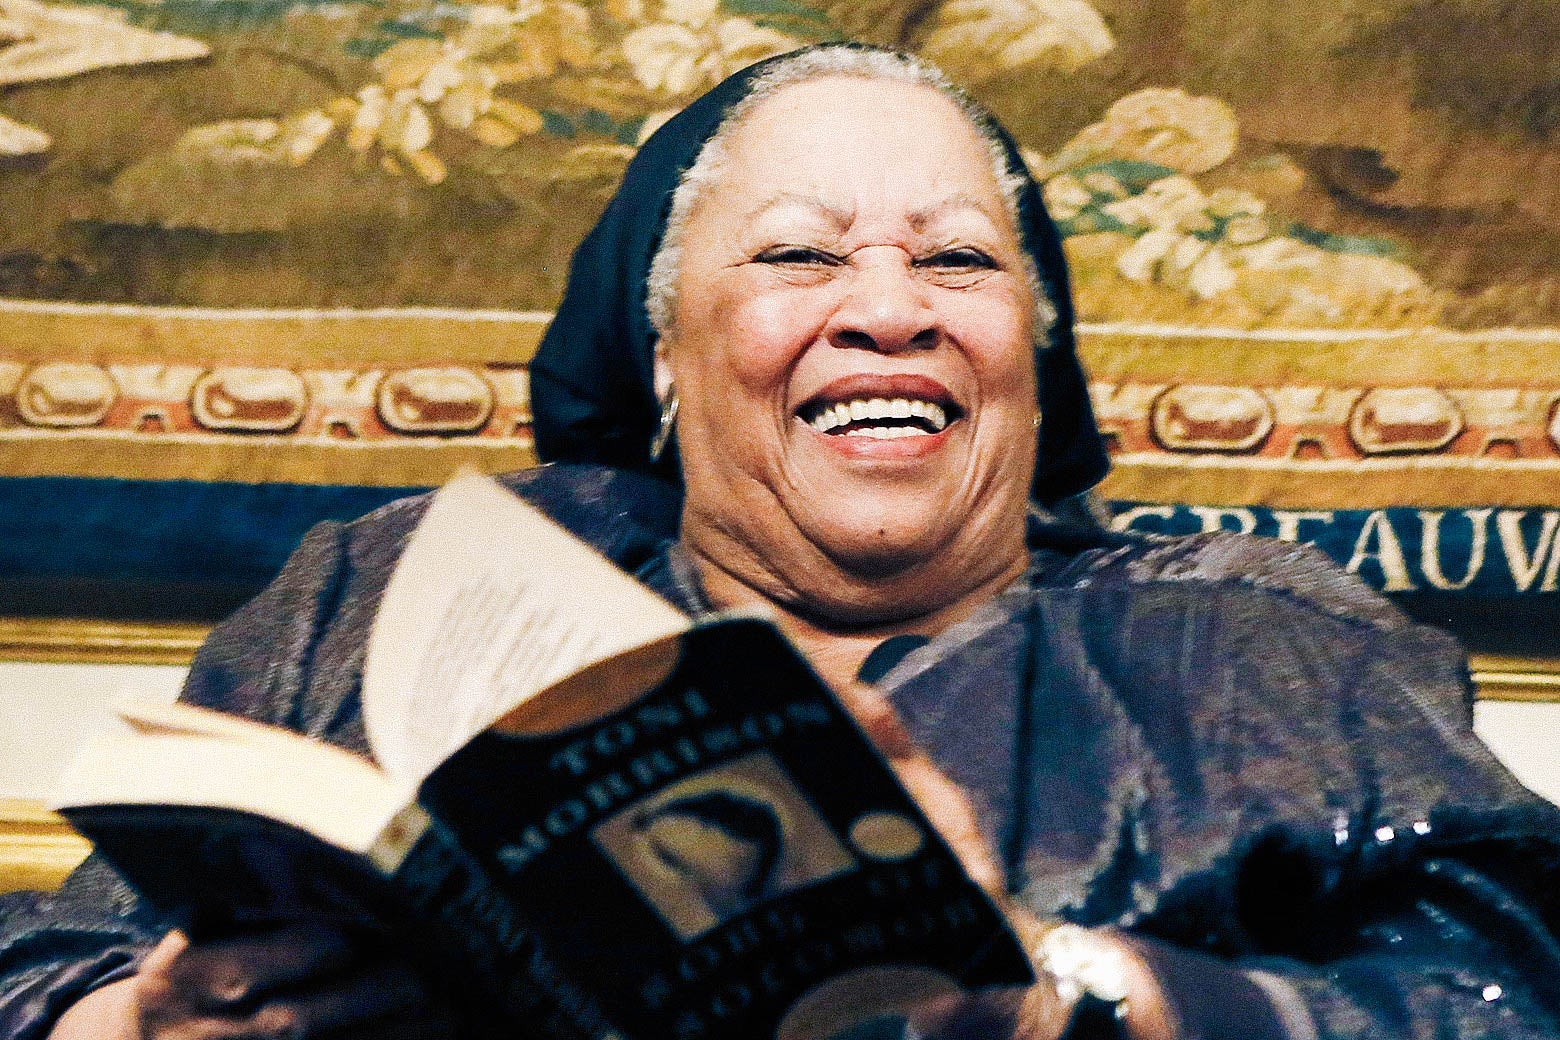 Toni Morrison smiling at a reception while turning the page of a book.